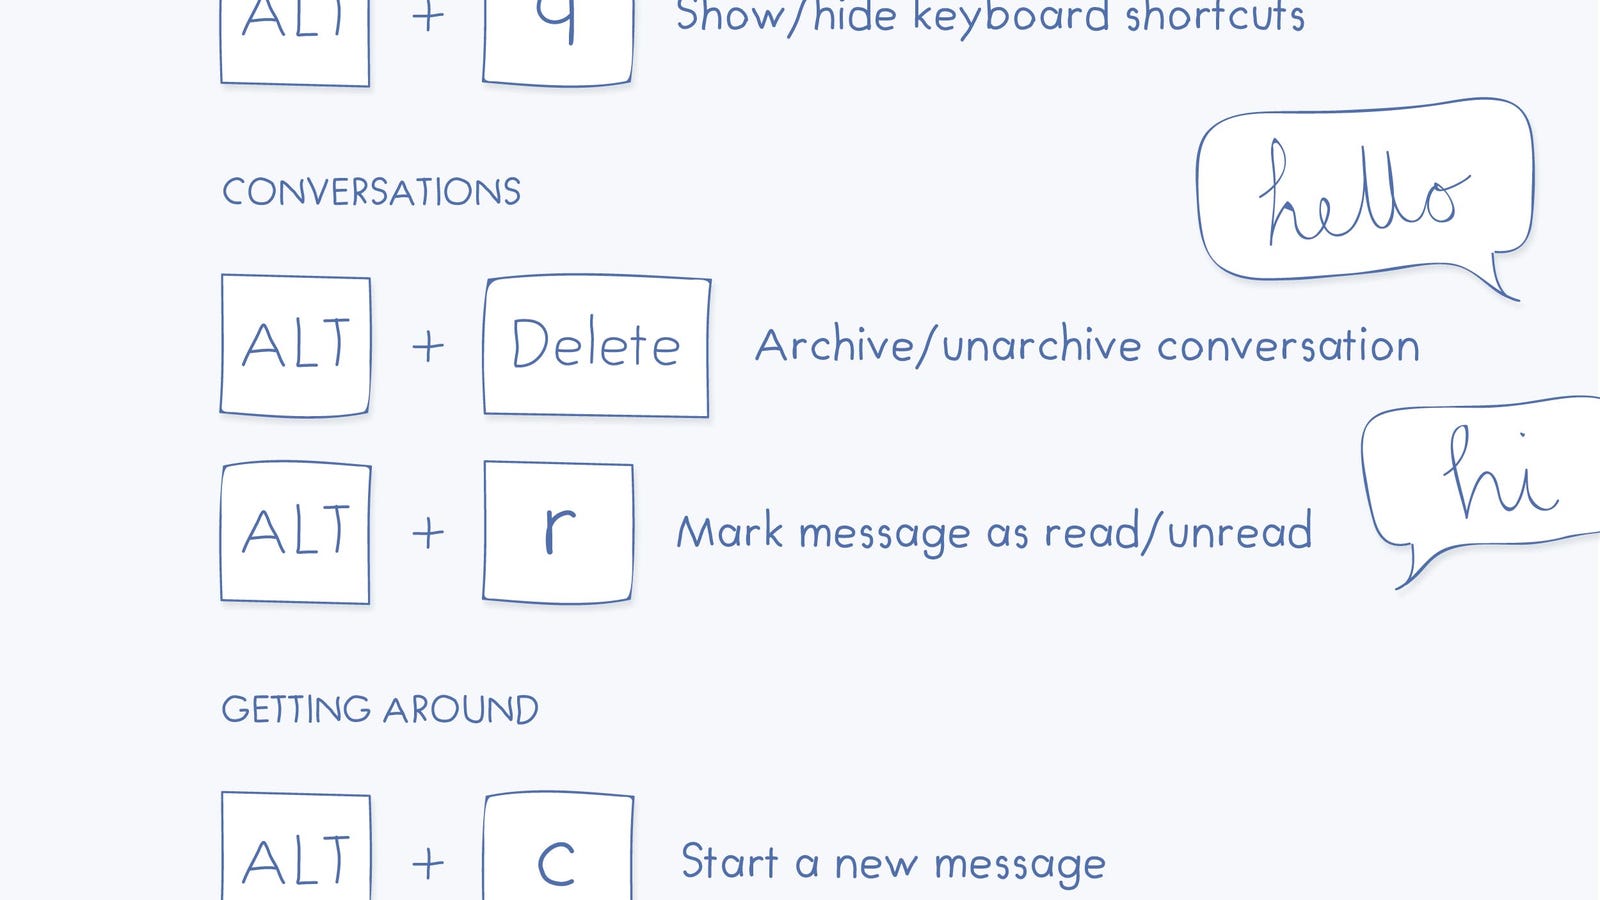 The Facebook Cheat Sheet Shows All The Facebook Keyboard Shortcuts